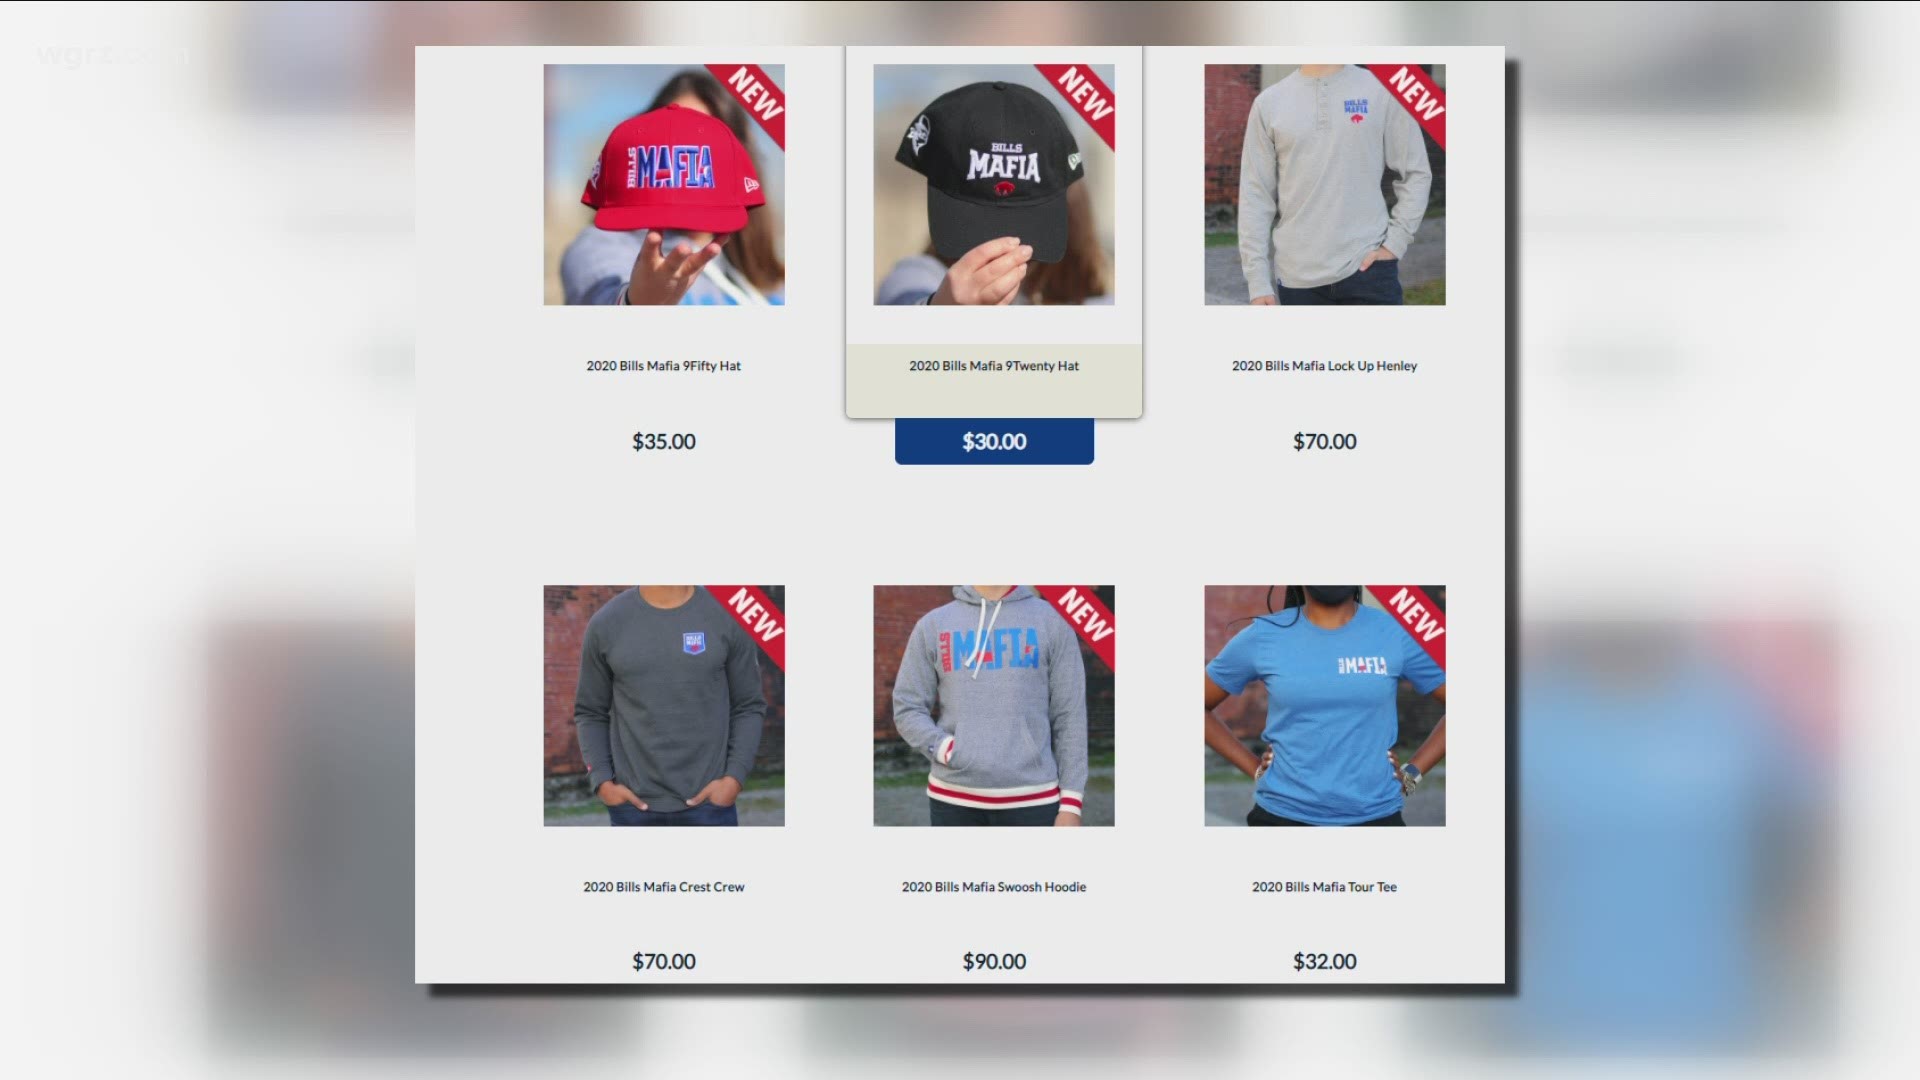 On Wednesday, the Bills released six items on to the team's online shop.